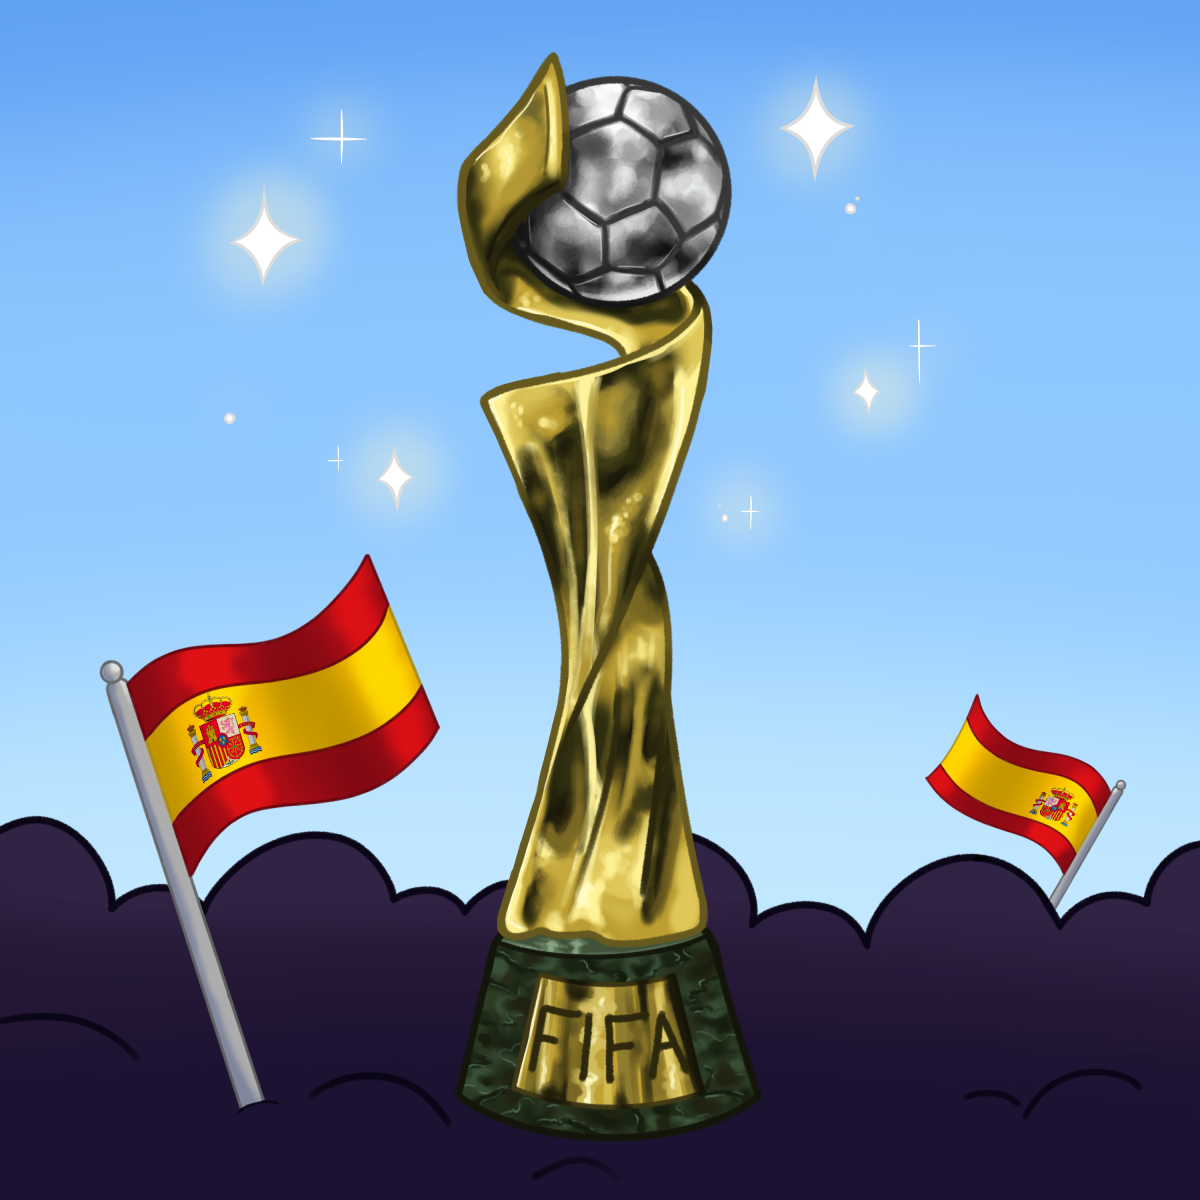 This+year+became+historic+for+Spain+as+the+Women%E2%80%99s+team+brought+the+title+home+for+the+first+time+ever.